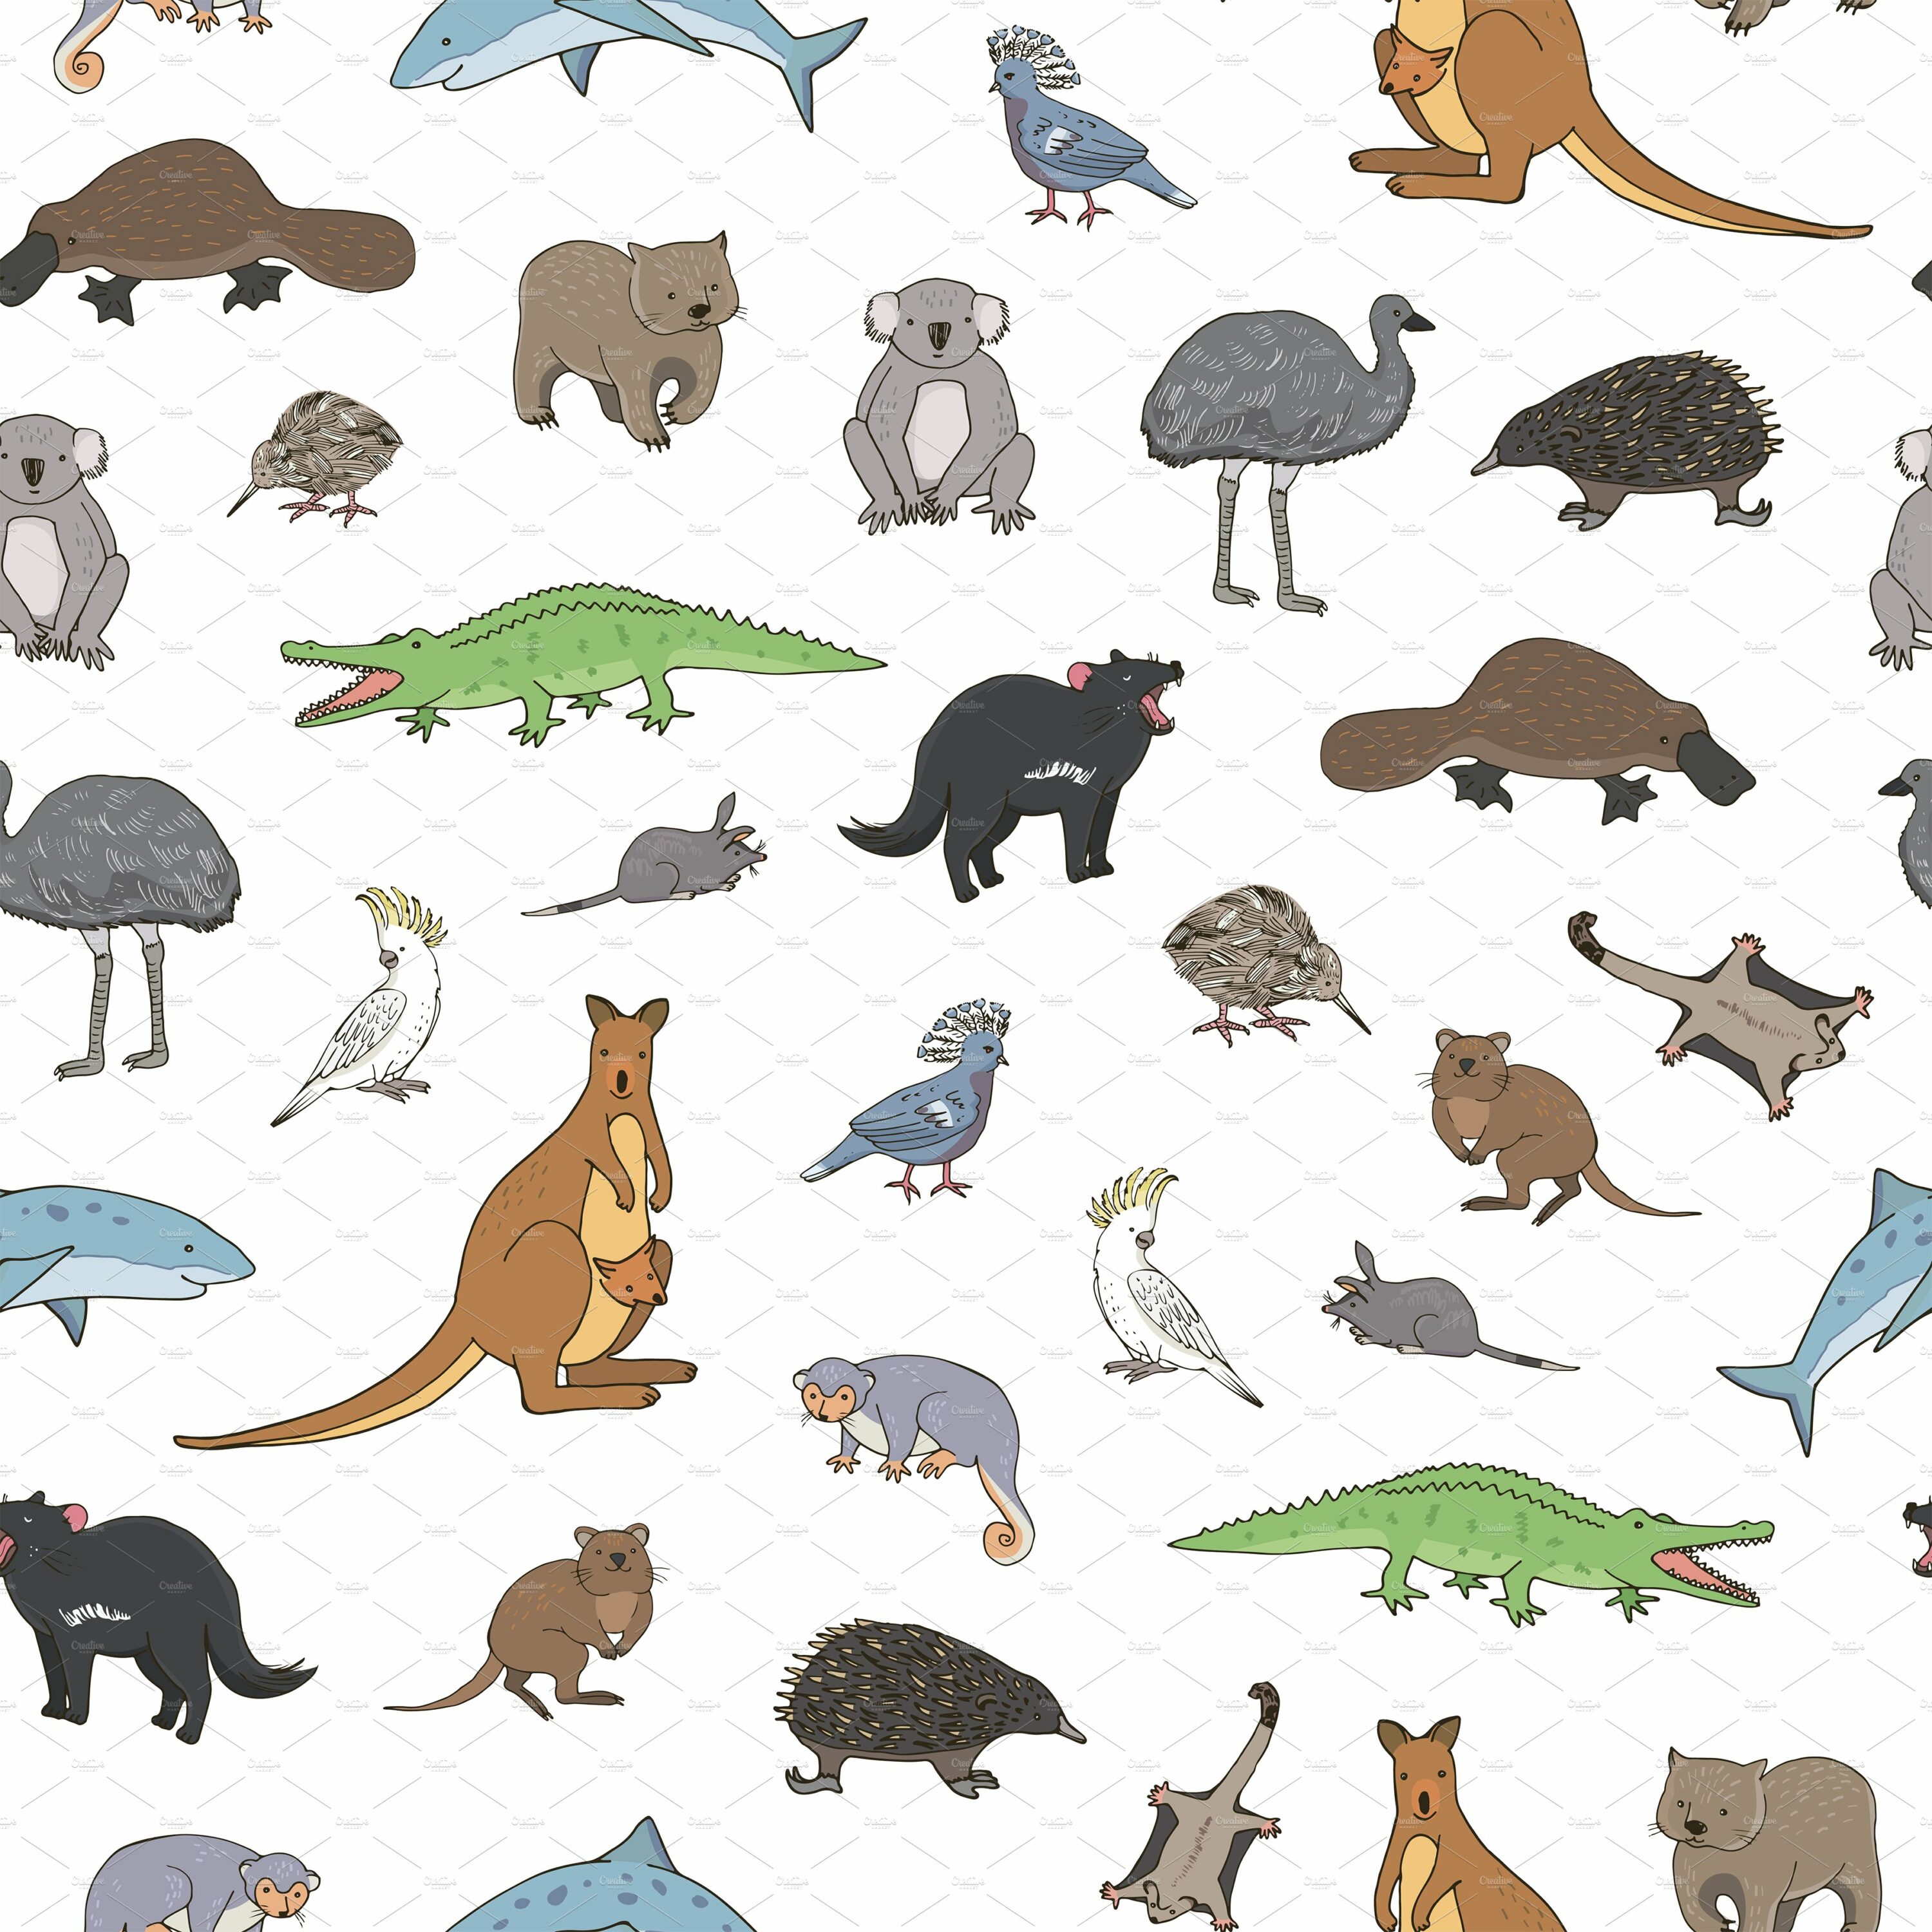 White background with the colorful forest animals.